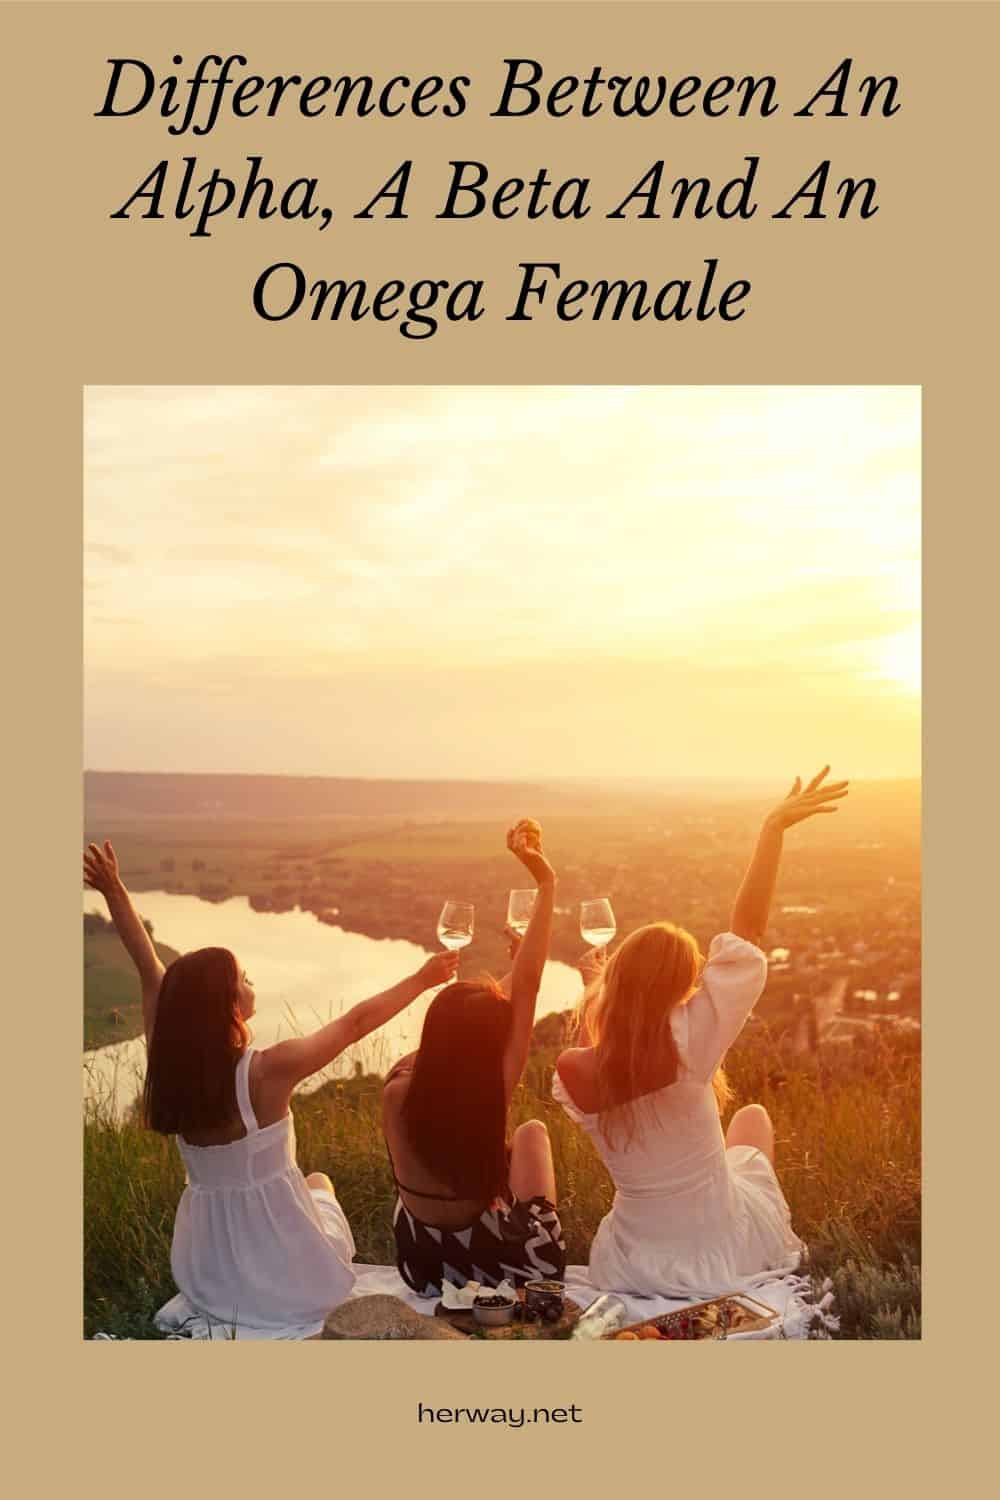 Differences Between An Alpha, A Beta And An Omega Female